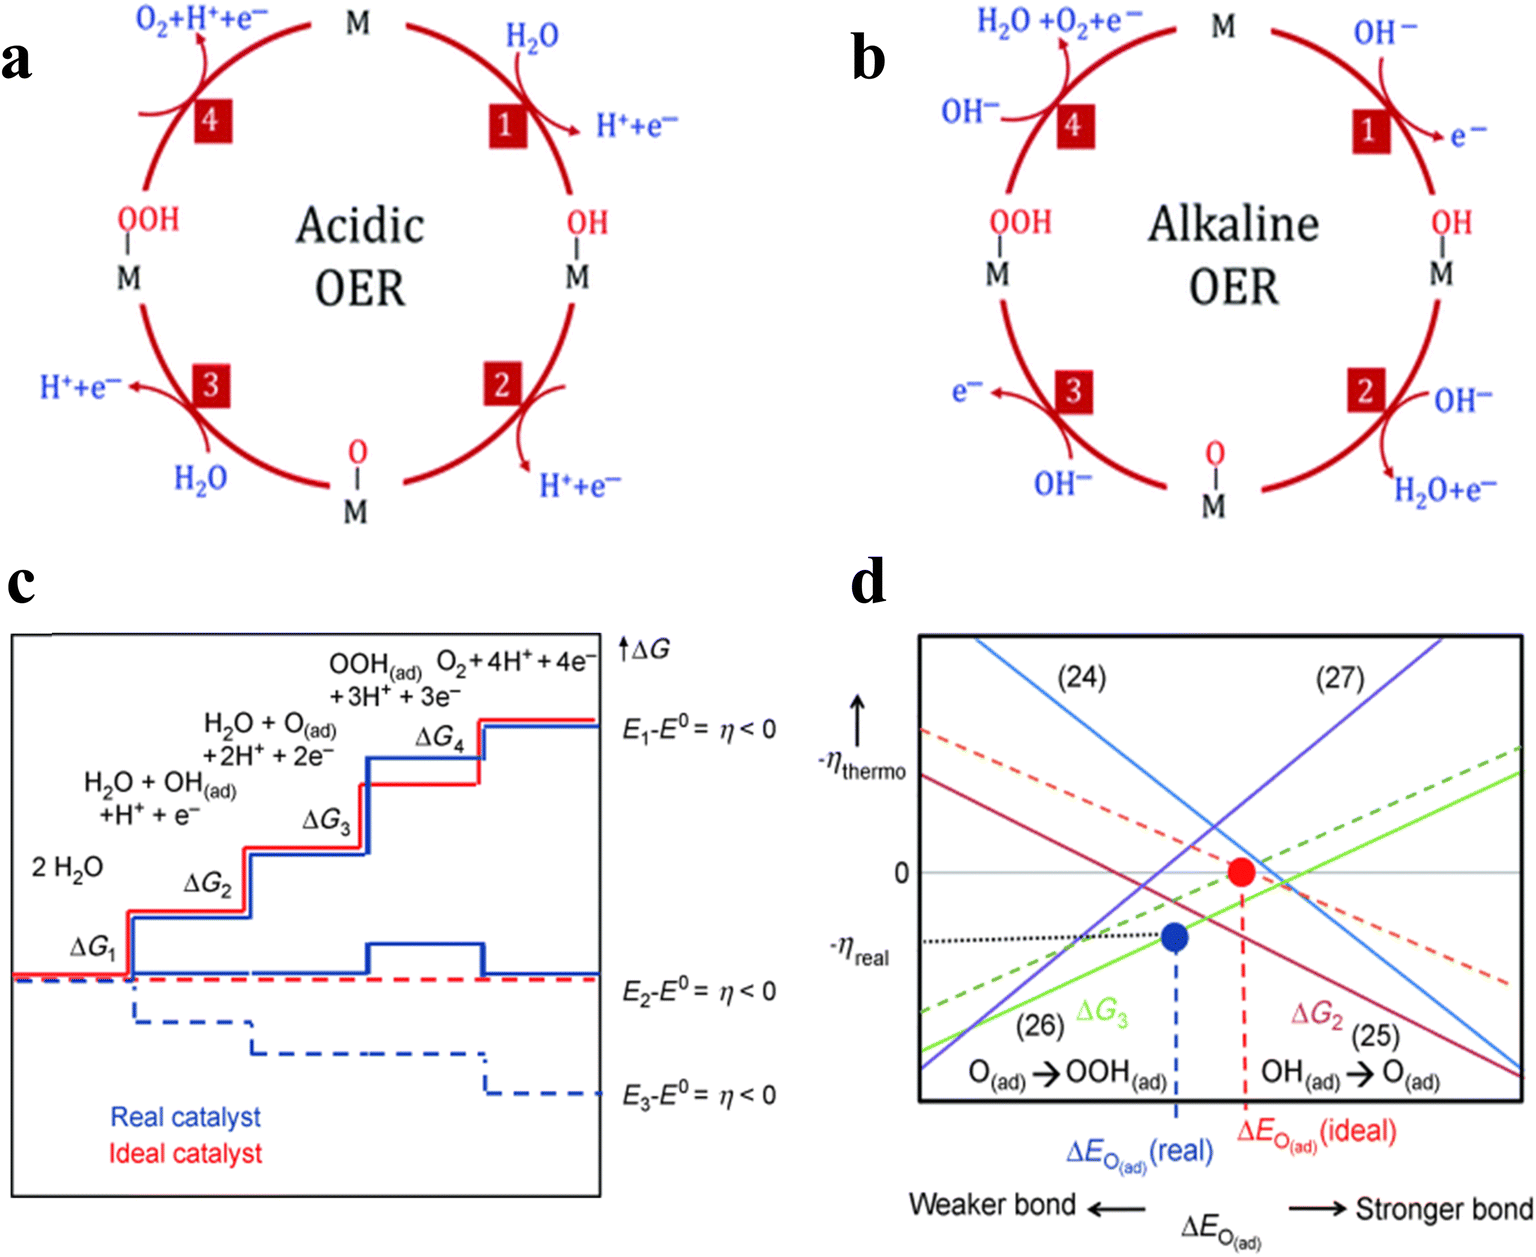 Intrinsic kinetic equation for oxygen reduction reaction in acidic media:  the double Tafel slope and fuel cell applications - Faraday Discussions  (RSC Publishing) DOI:10.1039/B802218F